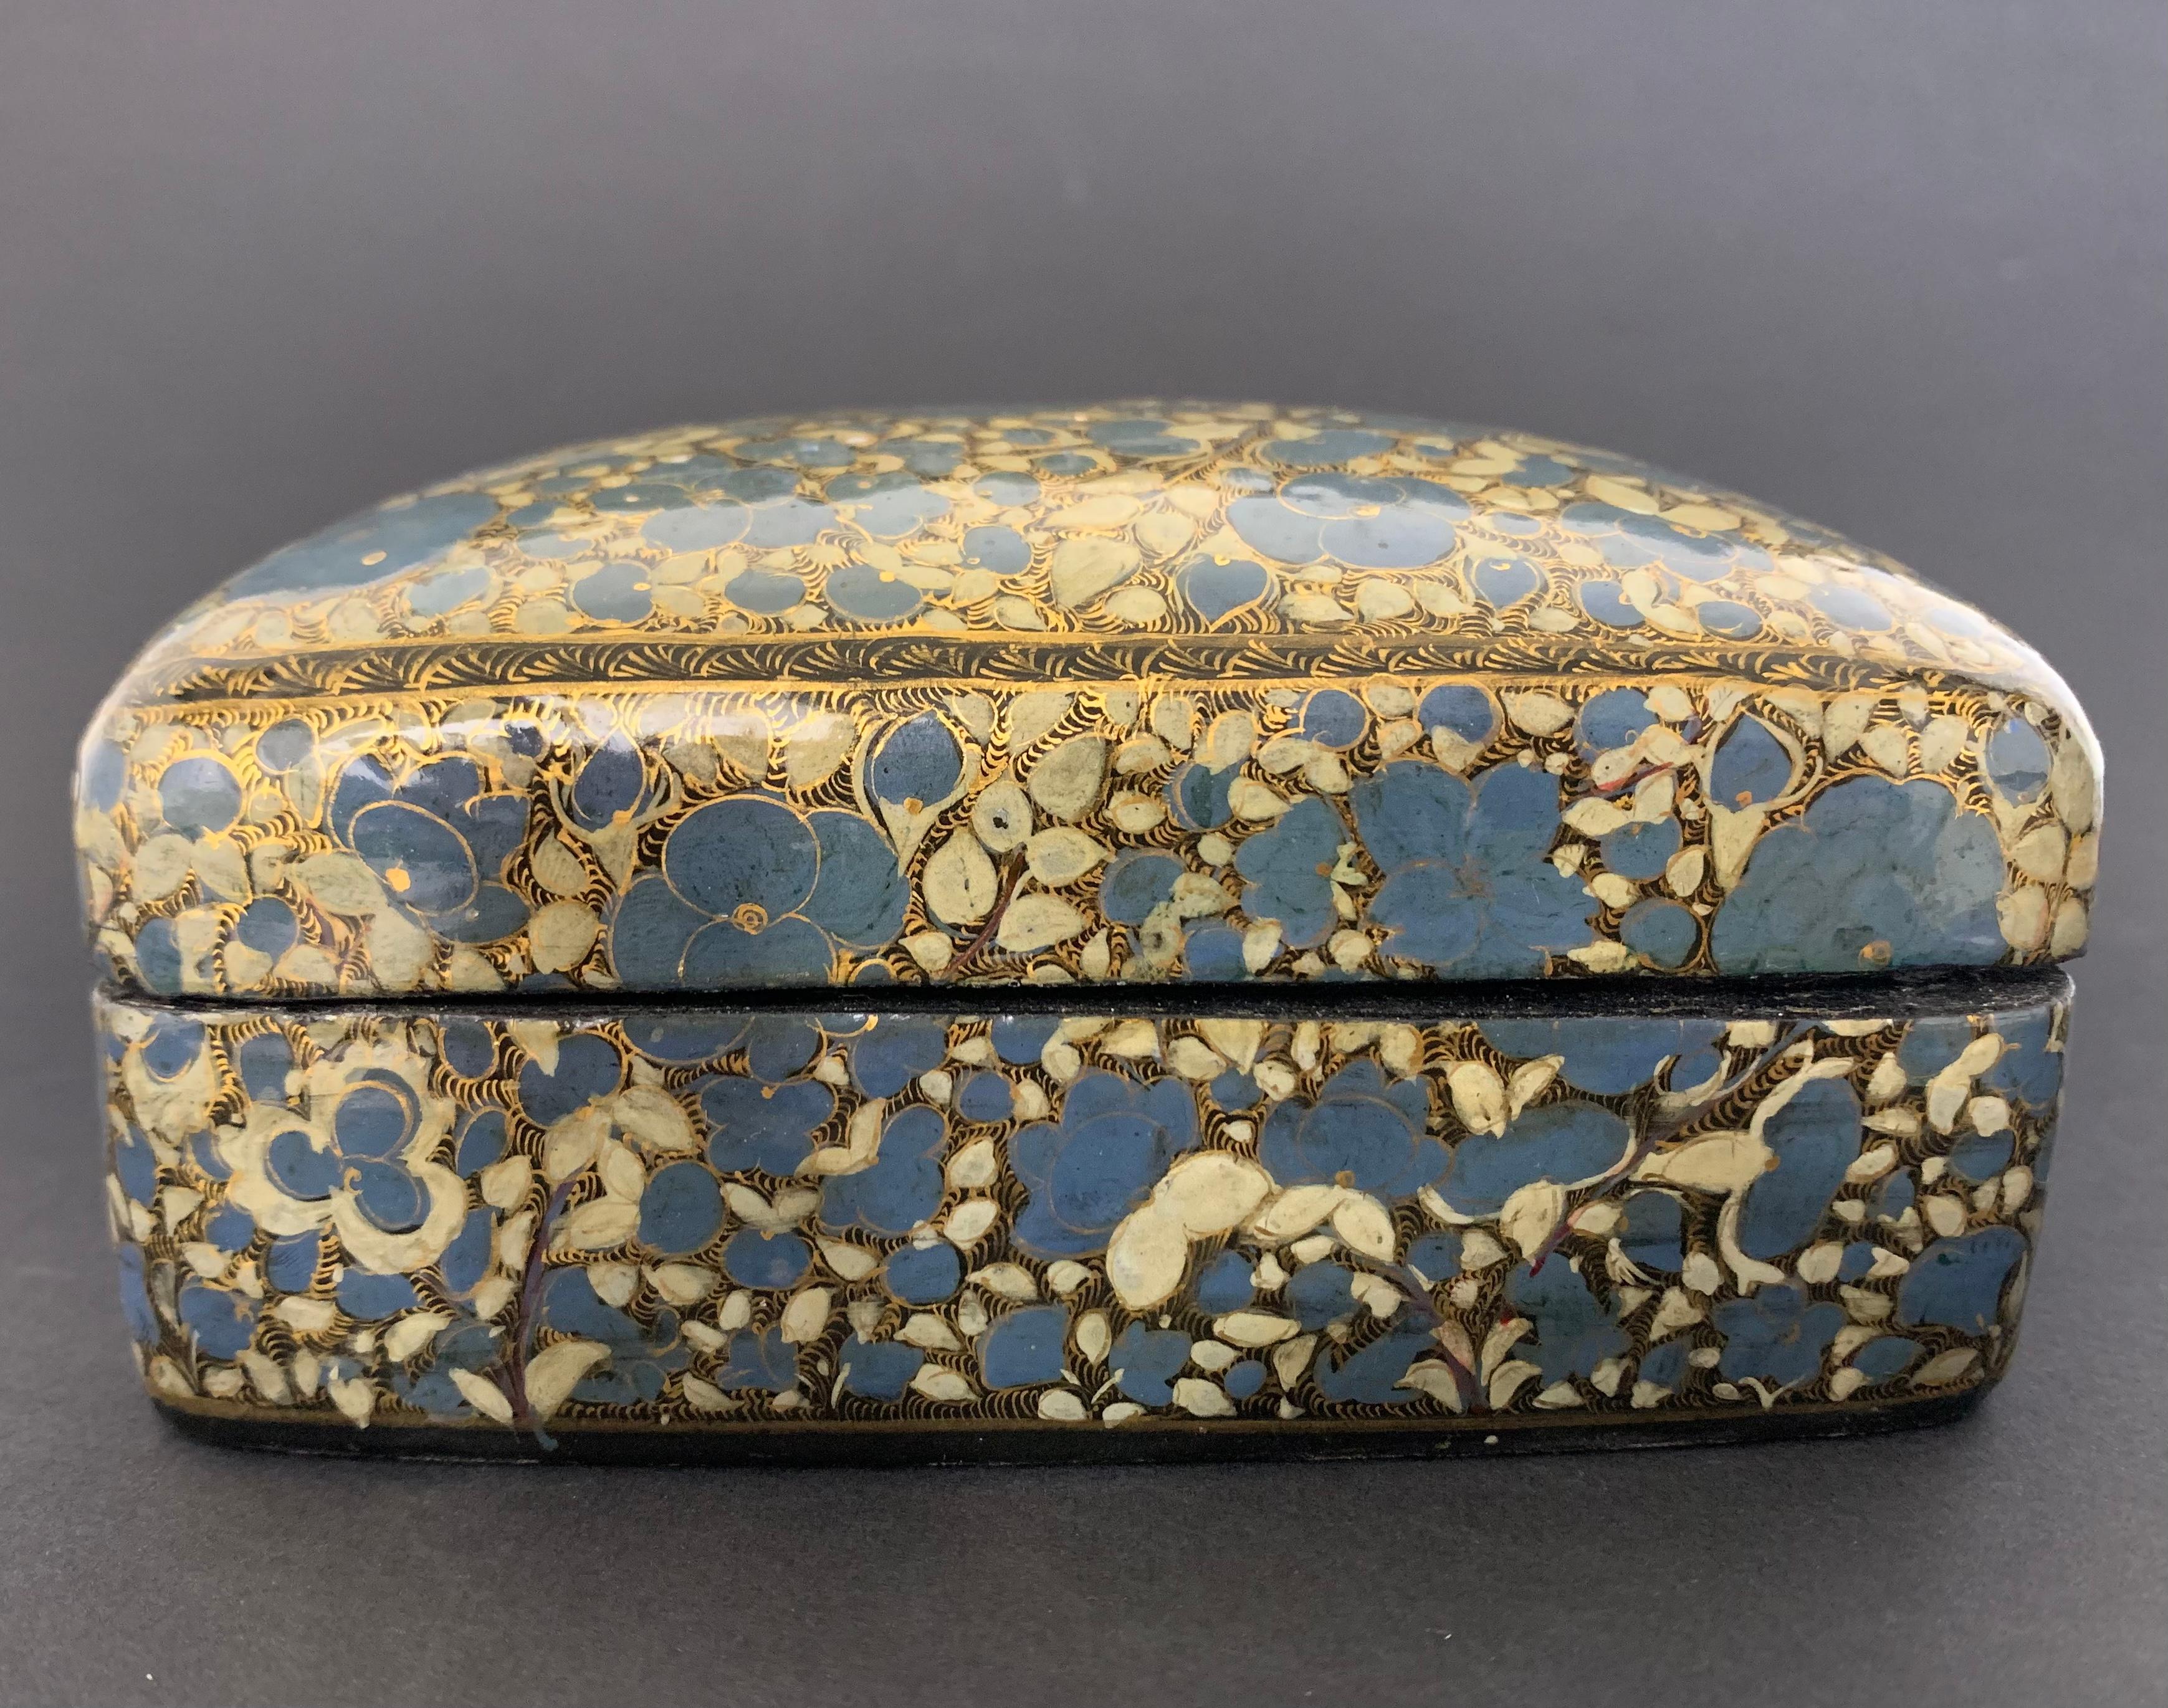 Nice little rectangular box made of papier-mâché. It is lacquered with blue, pale blue and gold floral motifs on a black background. It is dated from the 1900s and comes from Japon. It is ideal for storing jewellery.